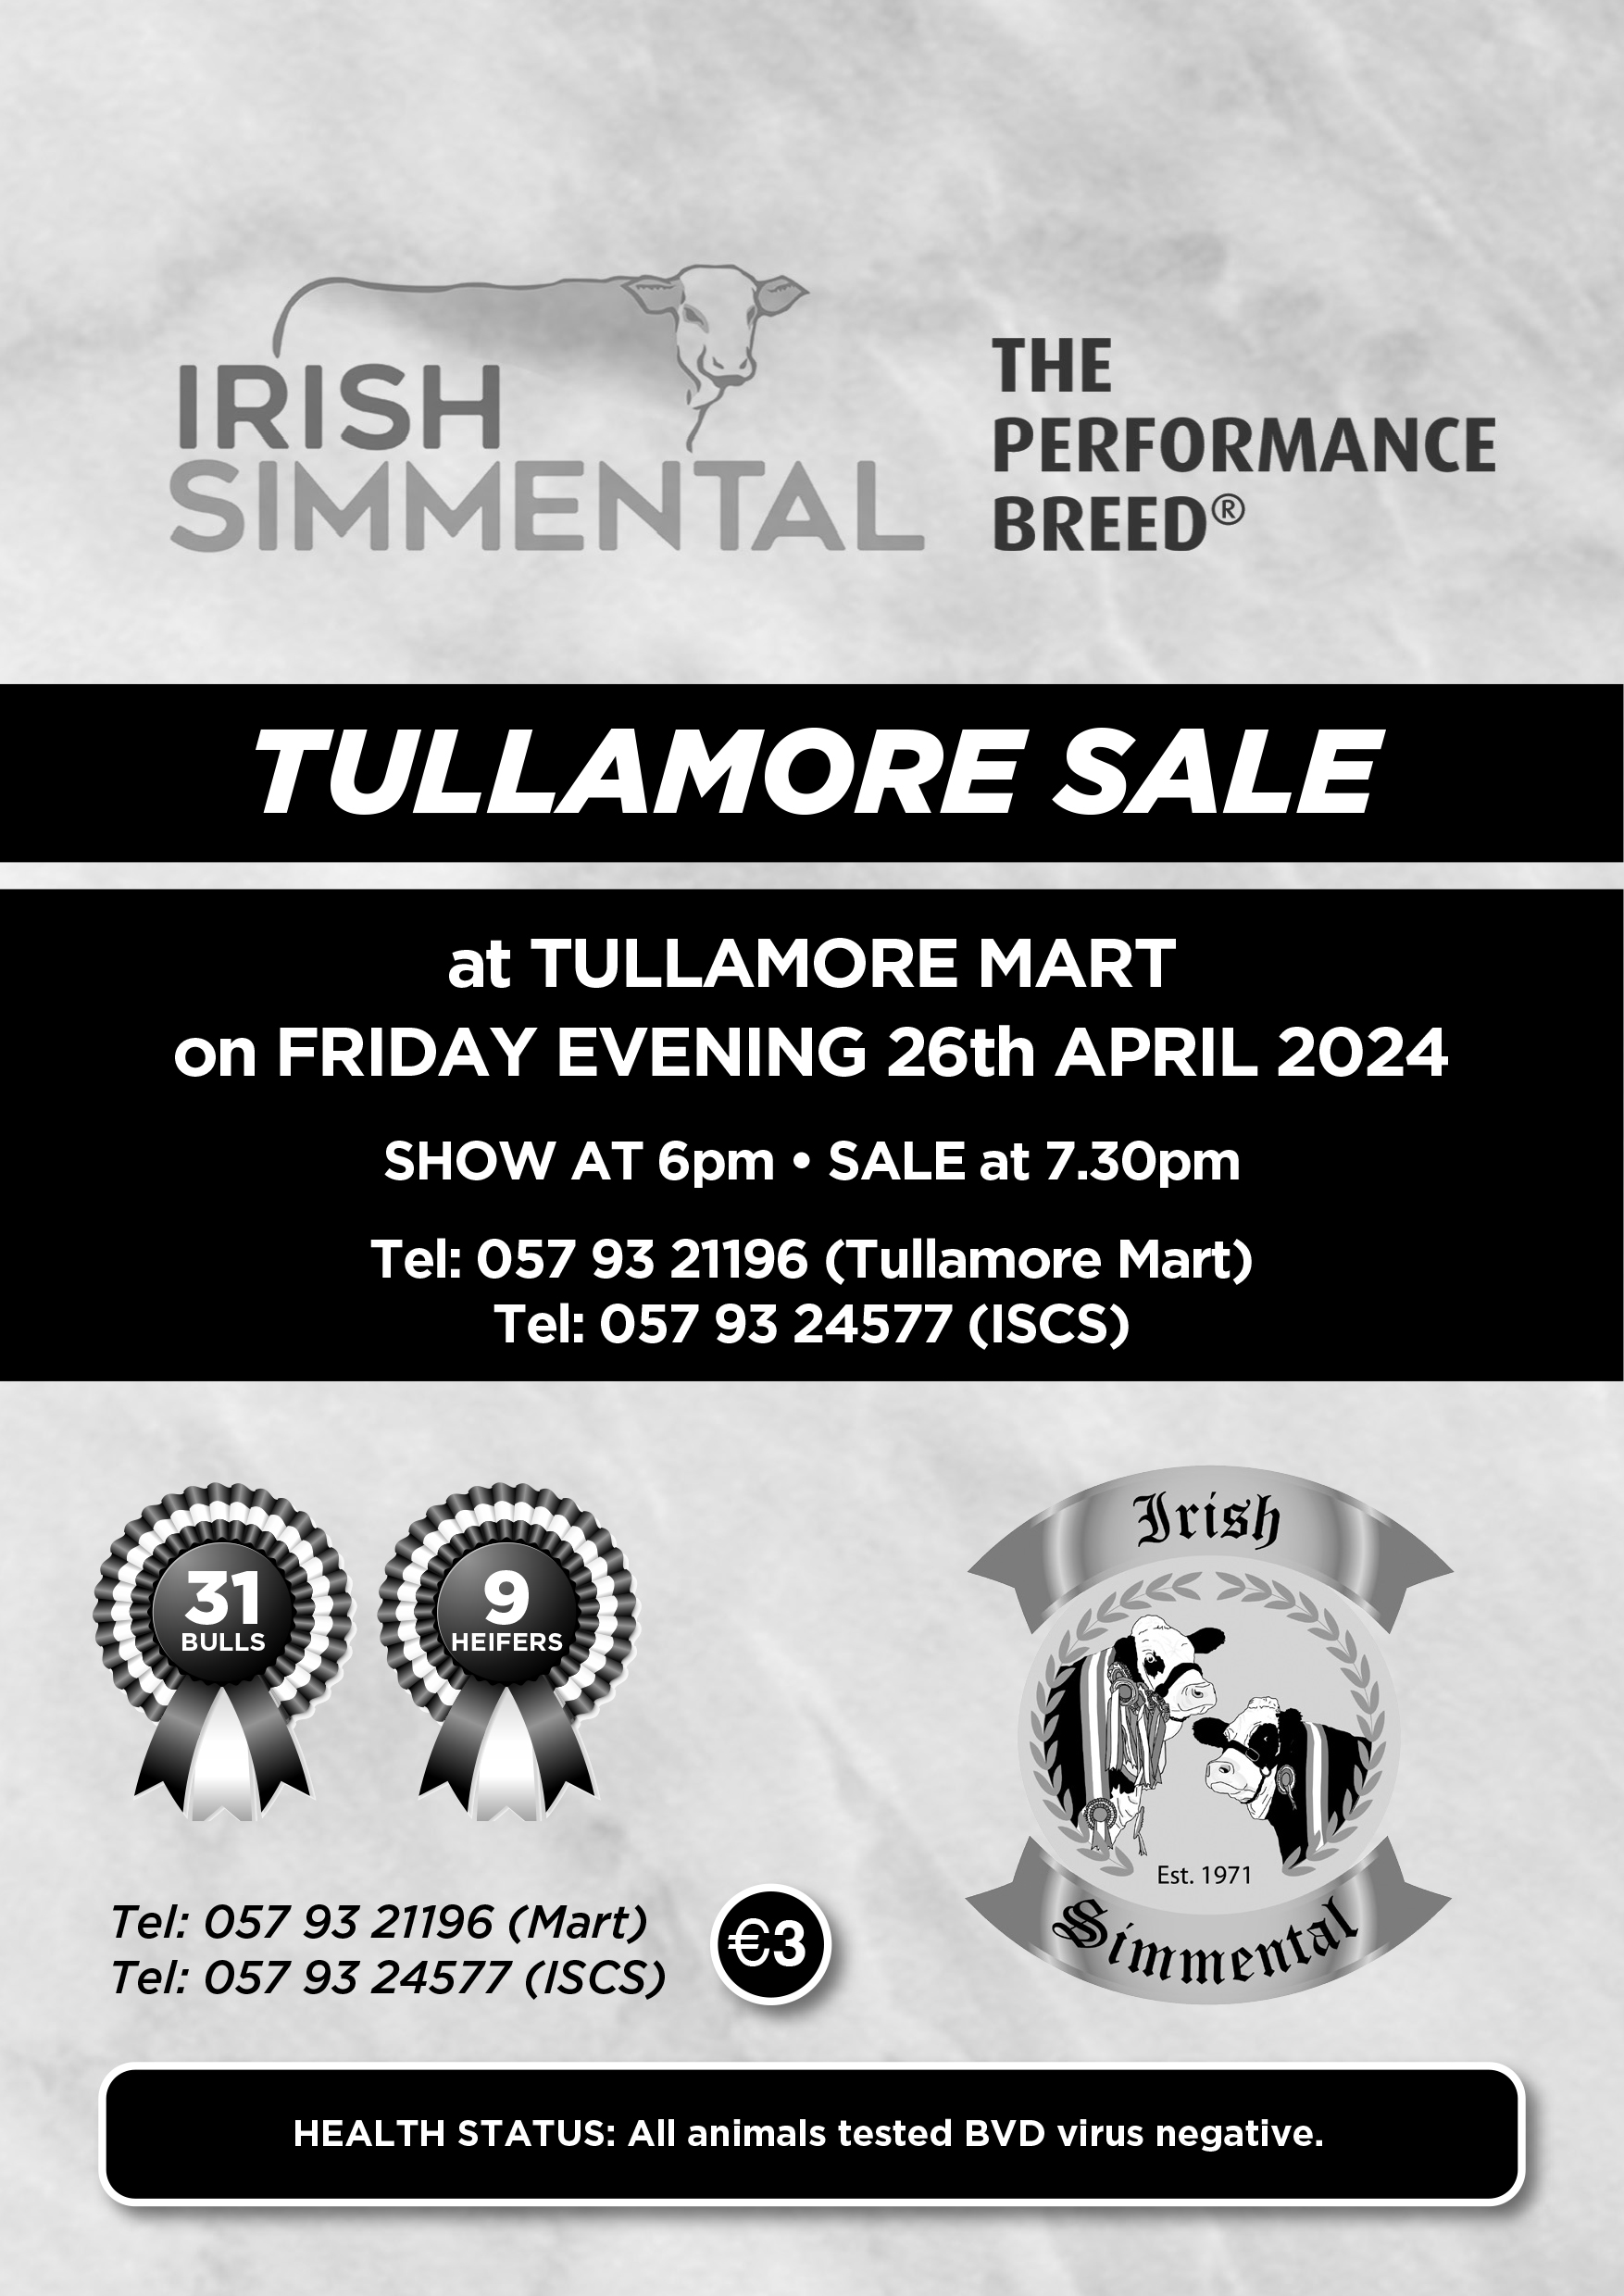 Catalogue, Photos & Videos Here for Tullamore Evening Show & Sale Friday 26th April at 6pm